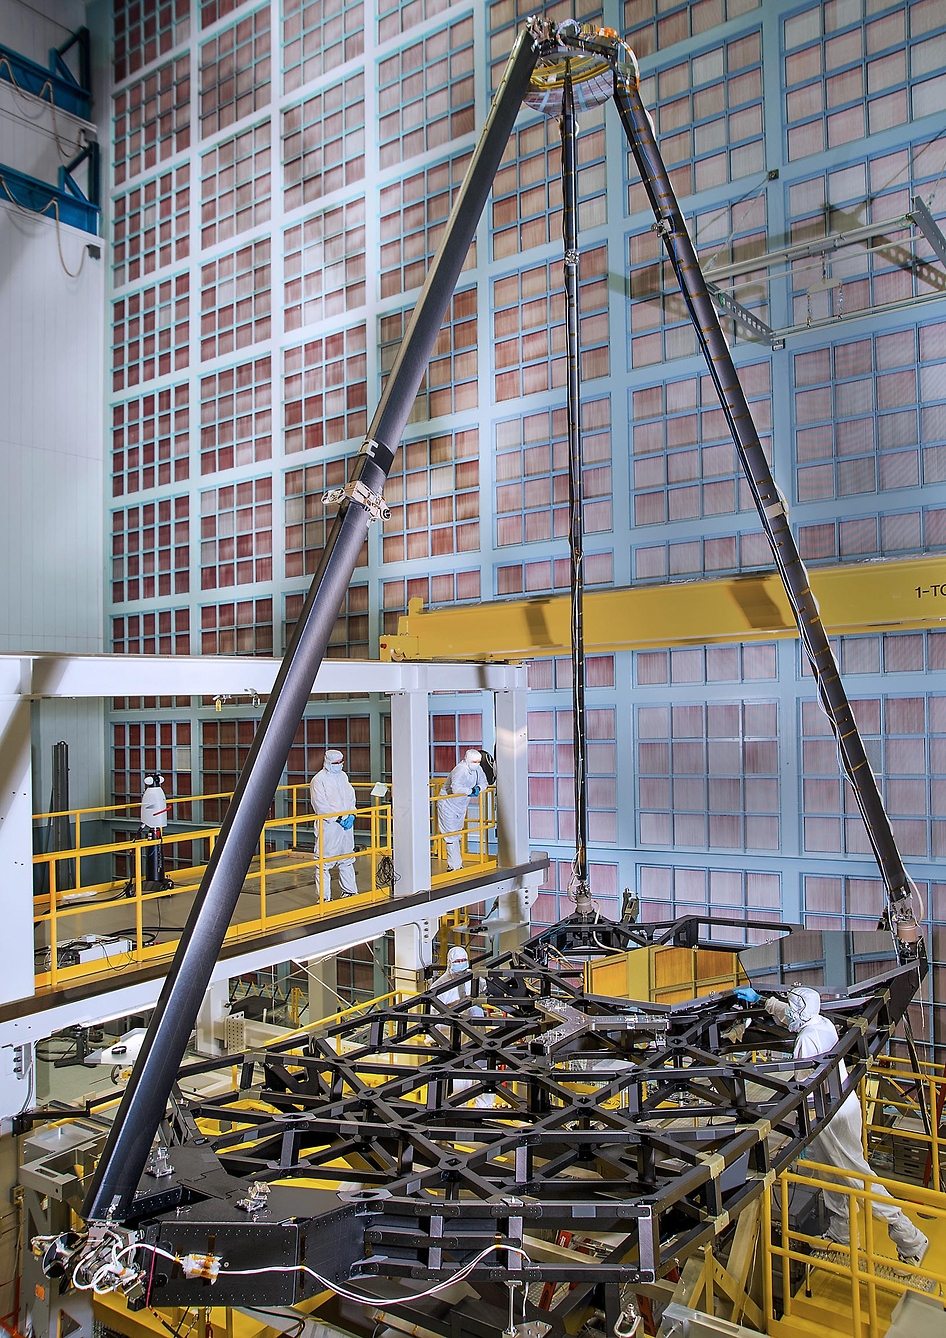 Inside a giant clean room at NASA's Goddard Space Flight Center in Greenbelt, Maryland, the pathfinder telescope, a practice section of the James Webb Space Telescope, stands fully assembled. Teams of engineers built and aligned the pathfinder telescope to rehearse assembly and testing before the actual telescope is built.  Credit: NASA/Chris Gunn